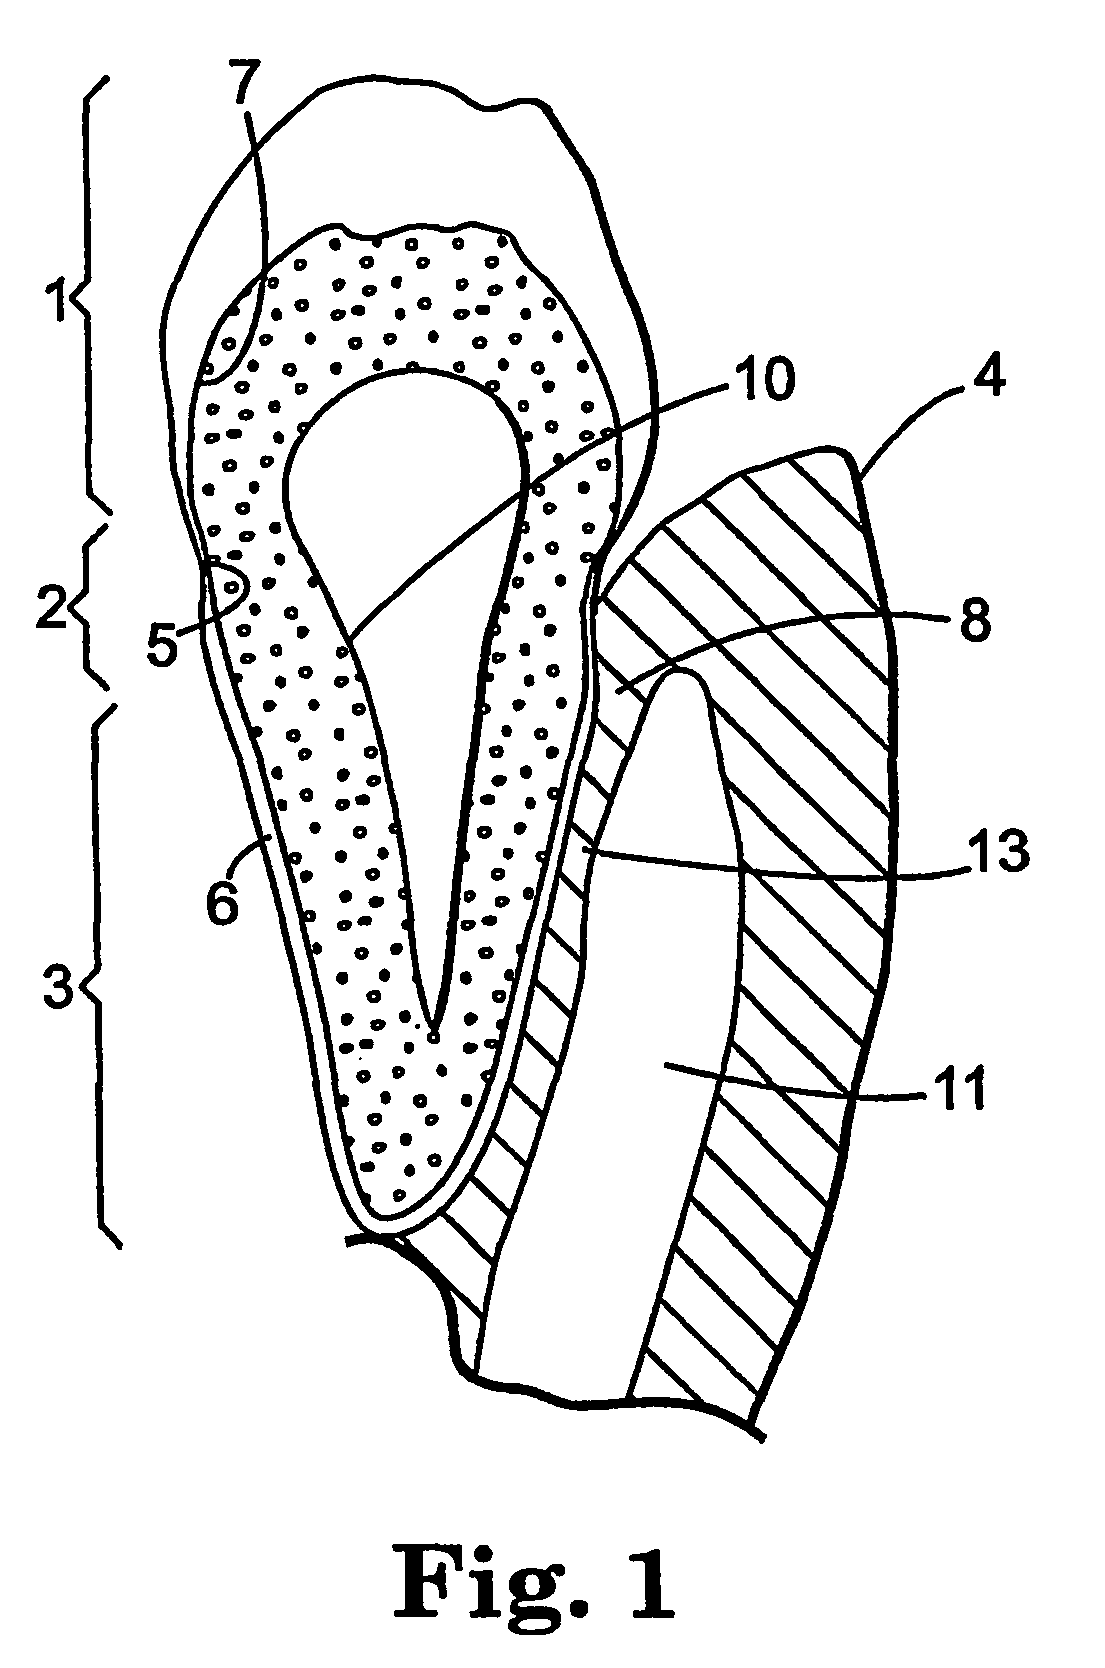 Methods for the treatment of periodontal disease